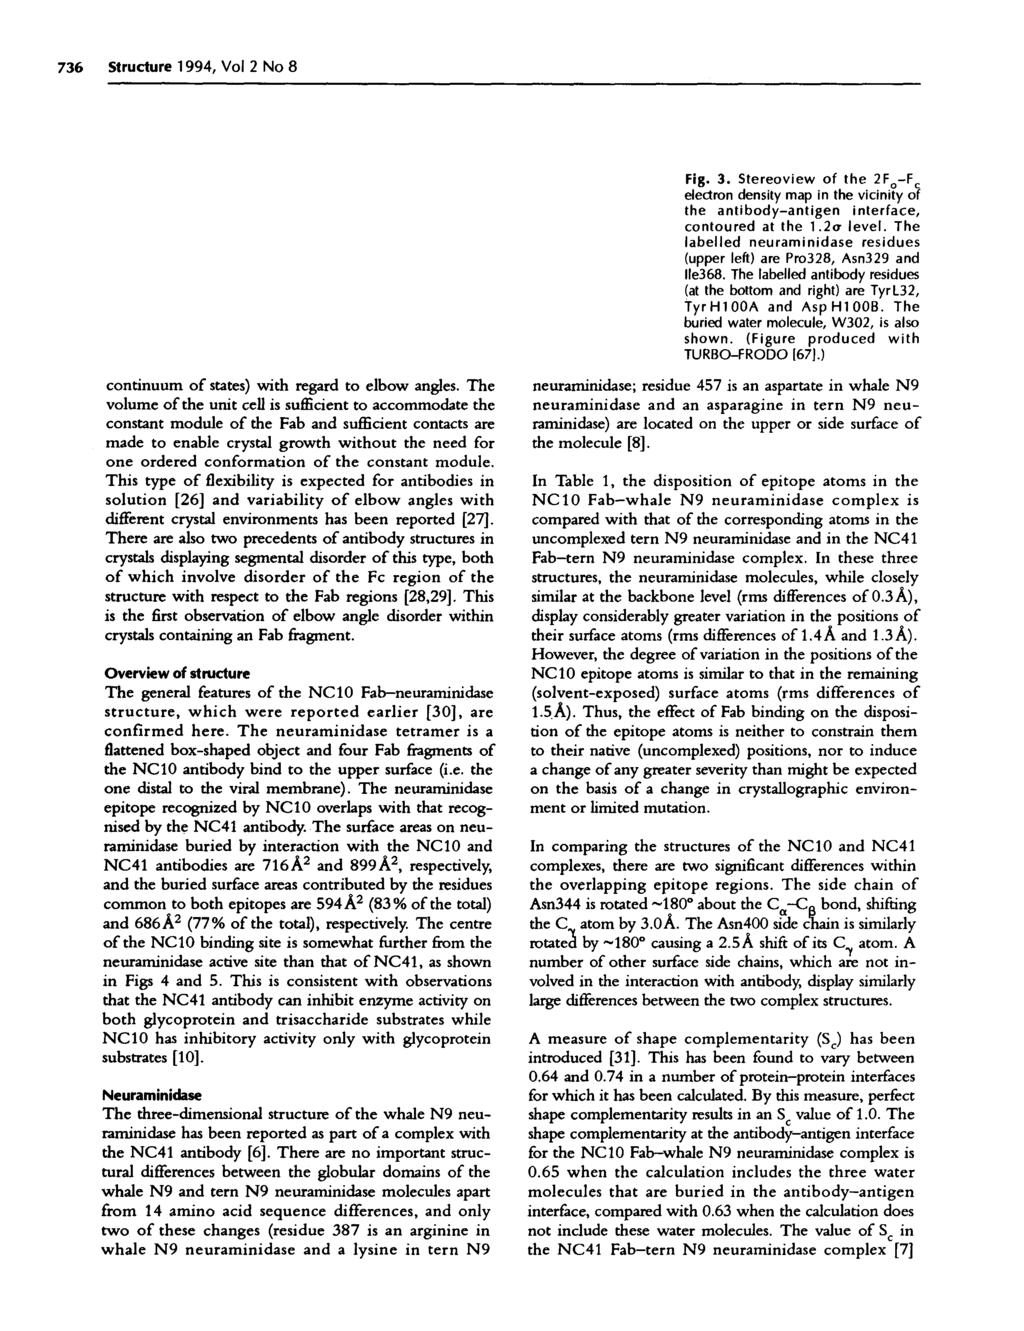 736 Structure 1994, Vol 2 No 8 Fig. 3. Stereoview of the 2Fo-F C electron density map in the vicinity of the antibody-antigen interface, contoured at the 1.2a level.